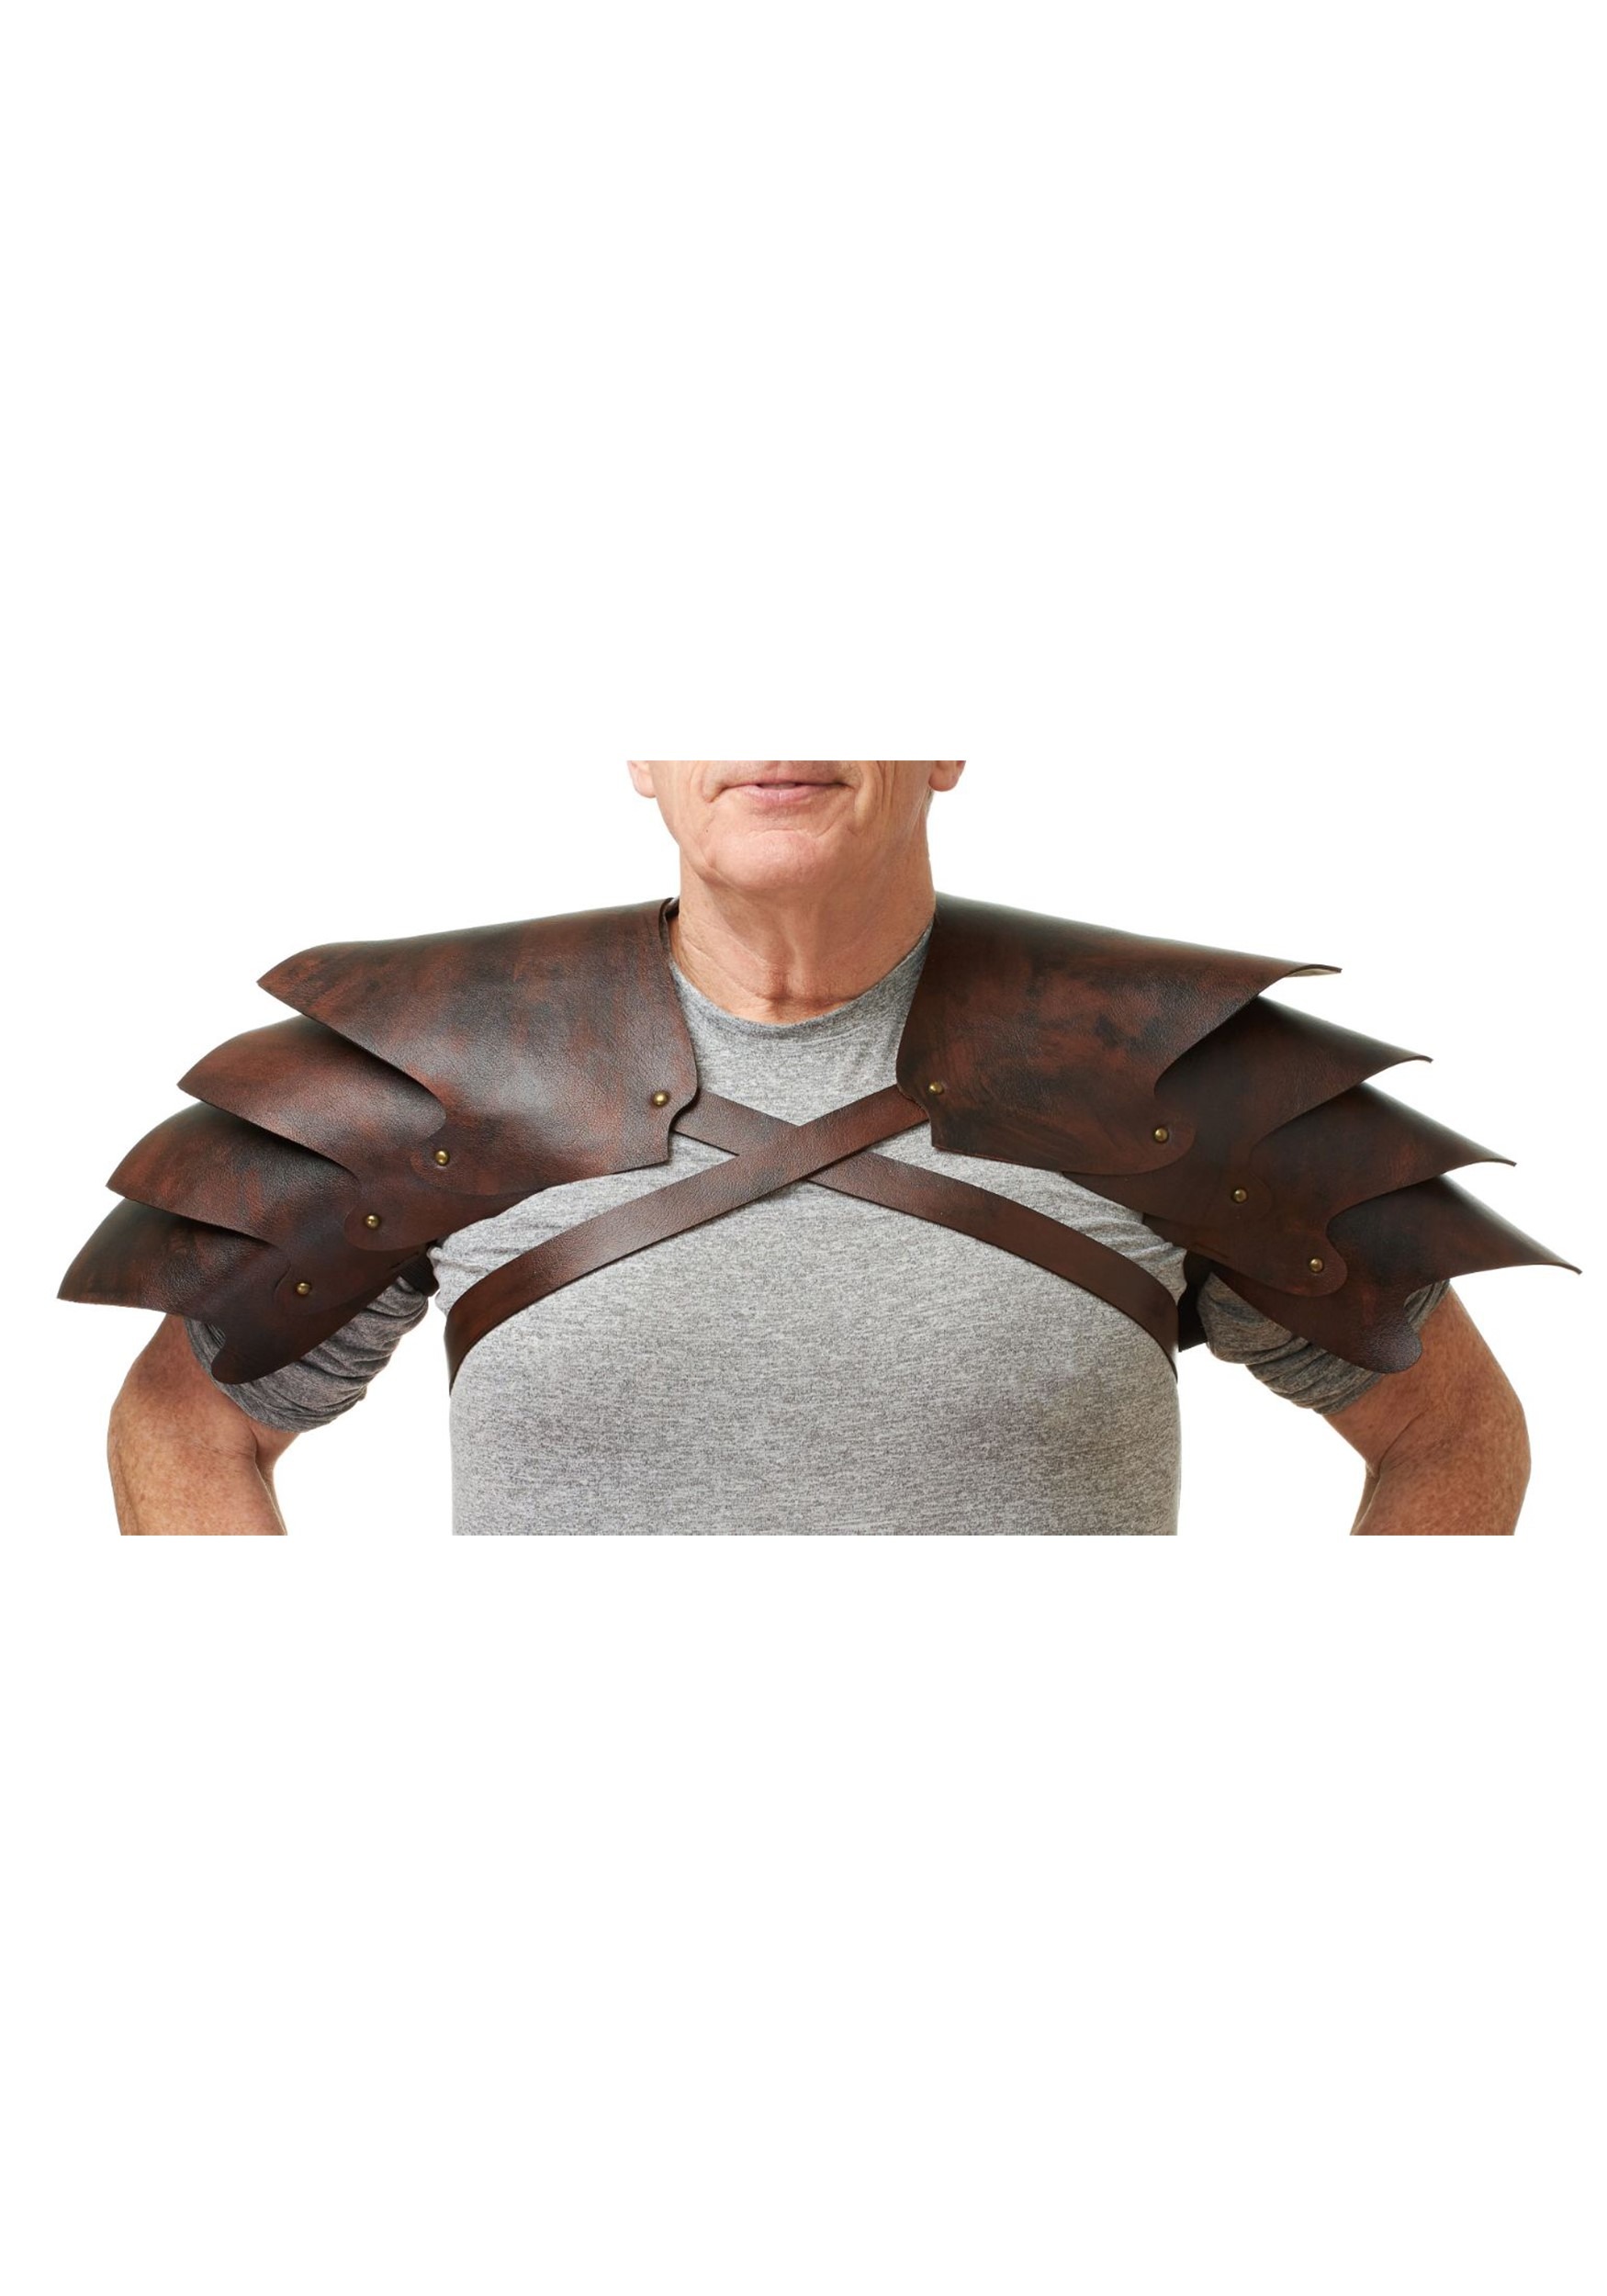 Faux Leather Shoulder Armor Costume Accessory